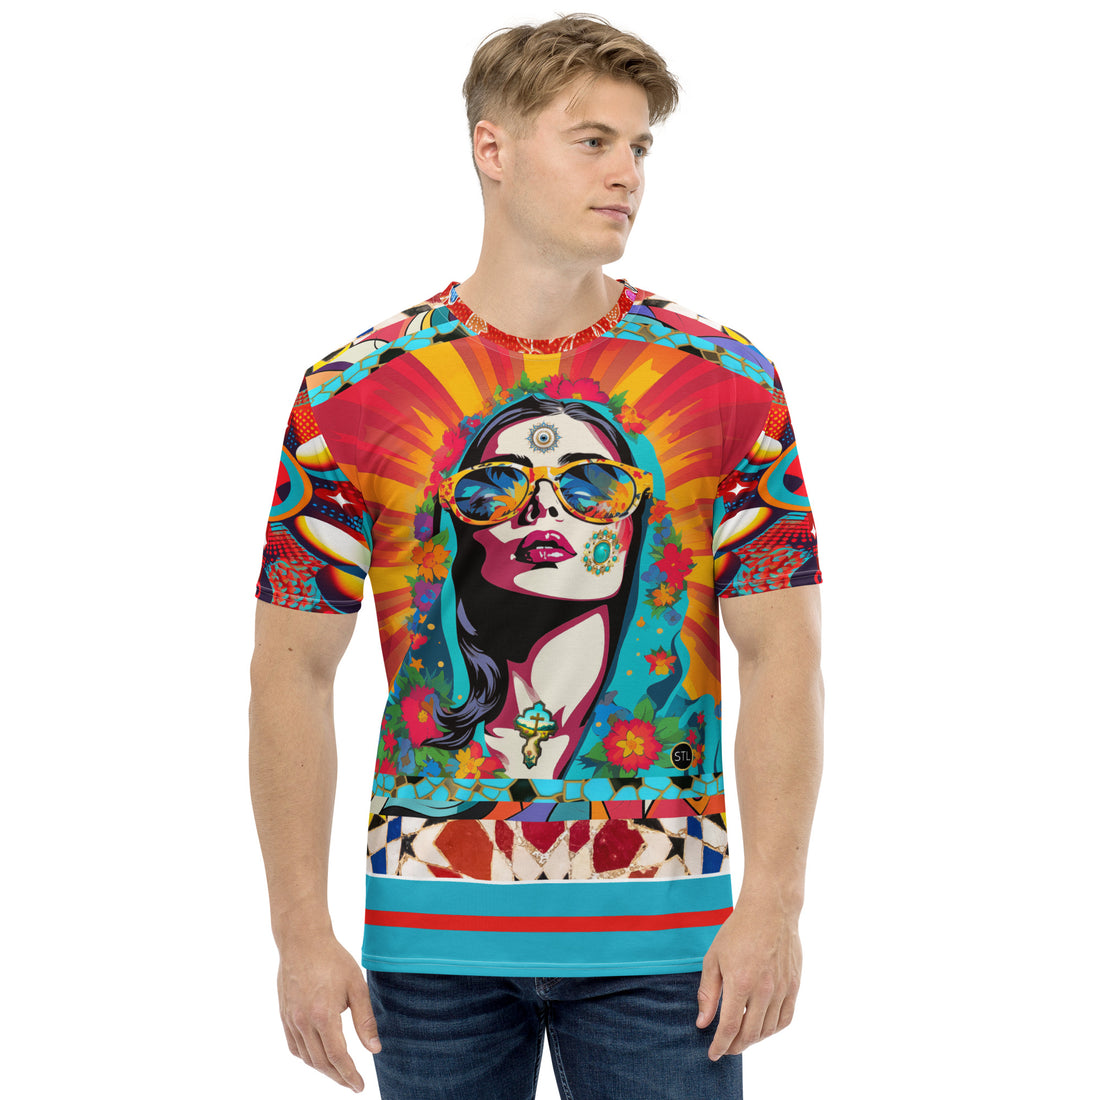 JC Superstar of the 5th Dimension 4-Way Stretch Unisex Tee